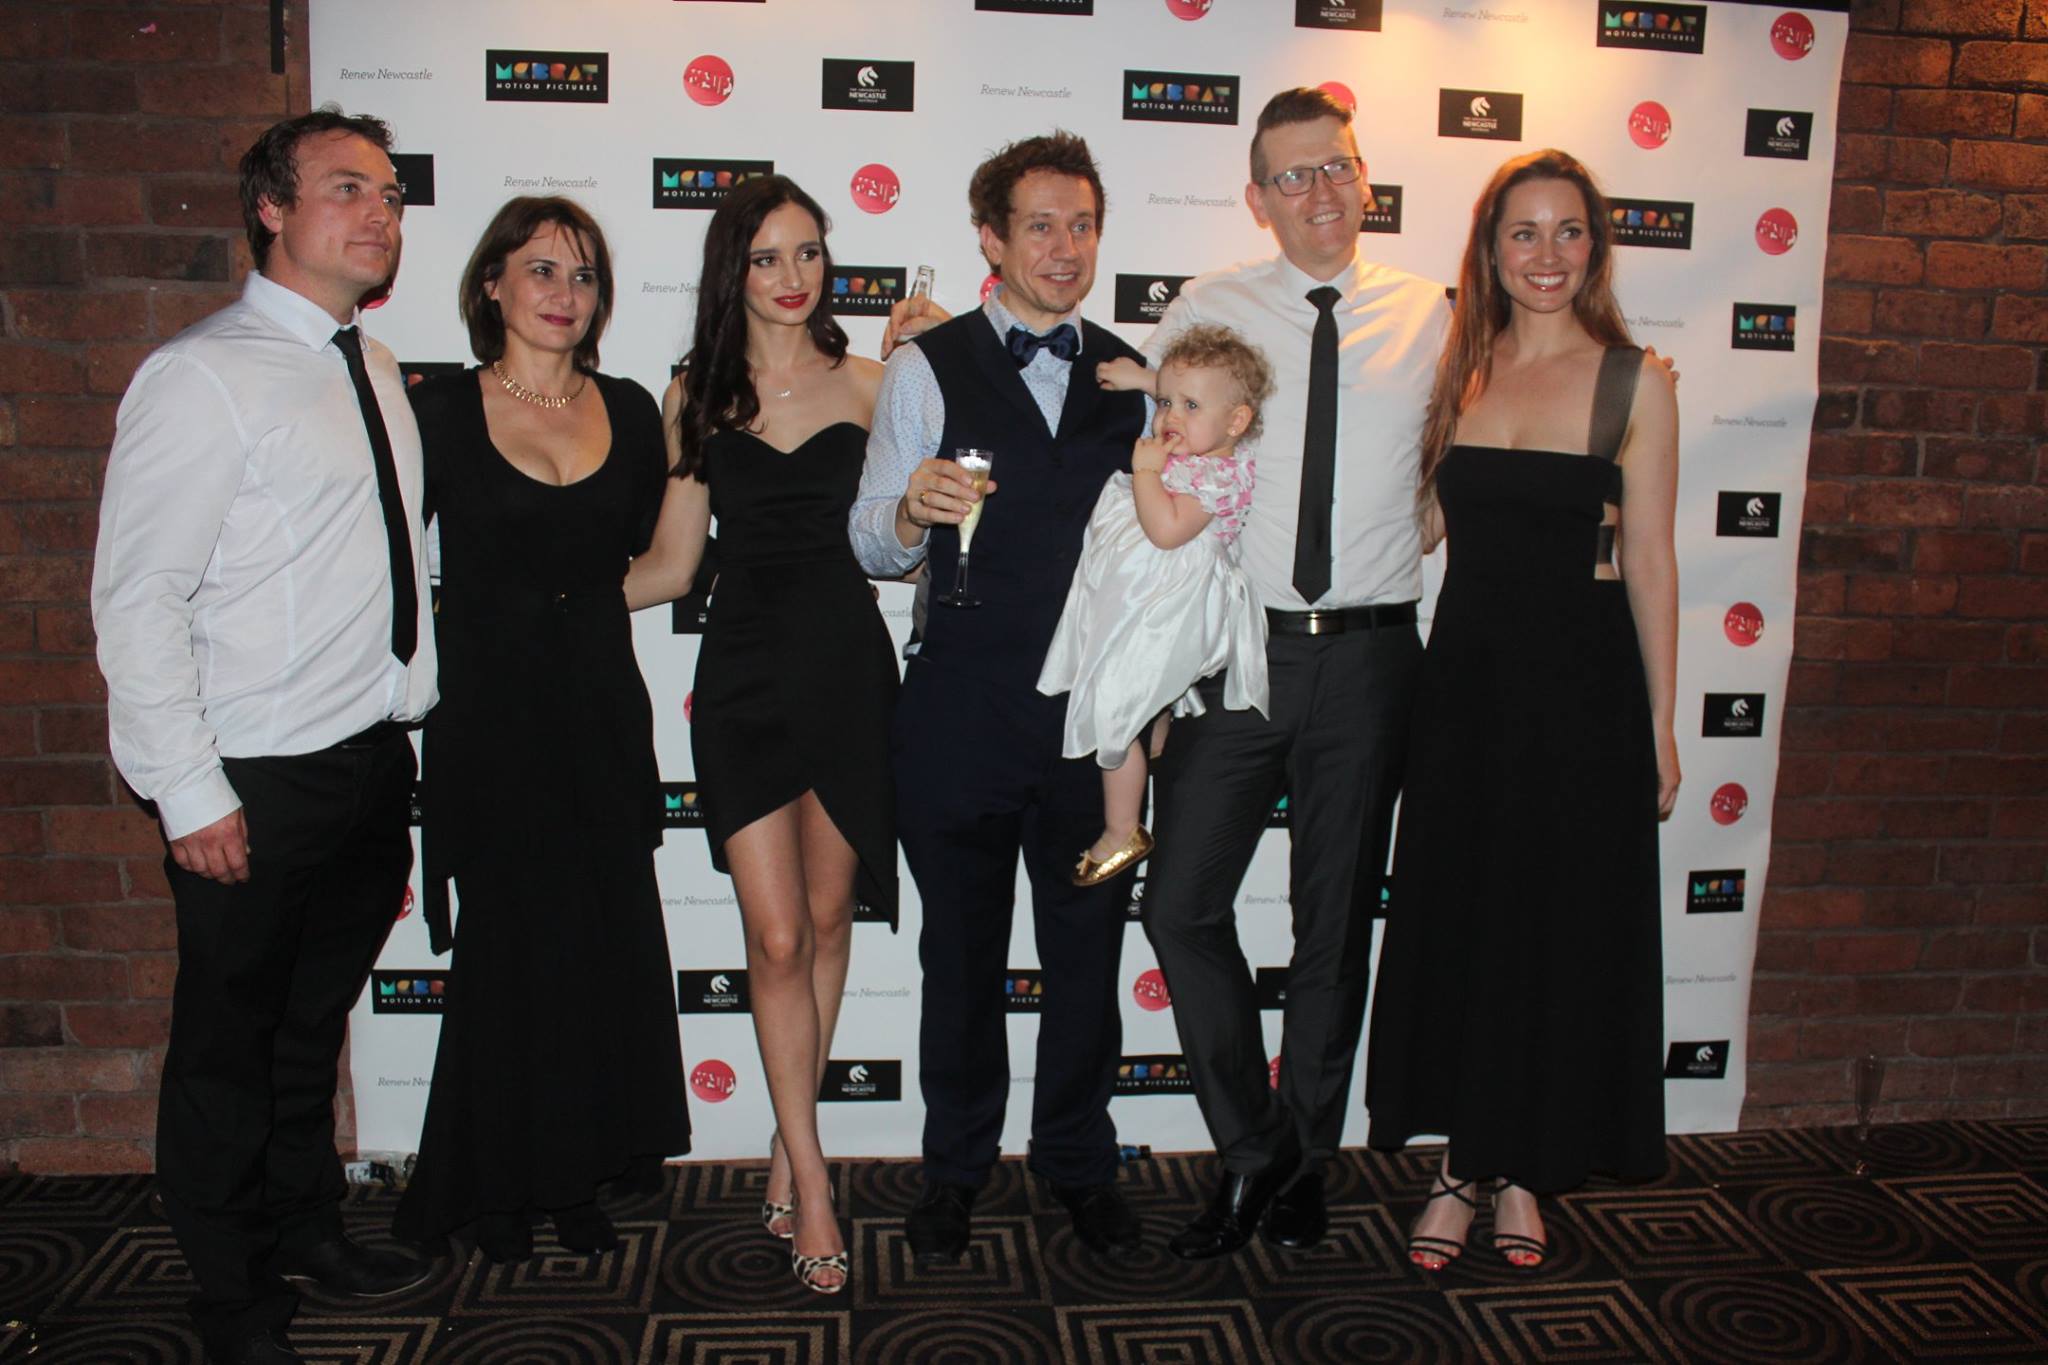 The cast with Director Stuart McBratney at the premiere screening of 